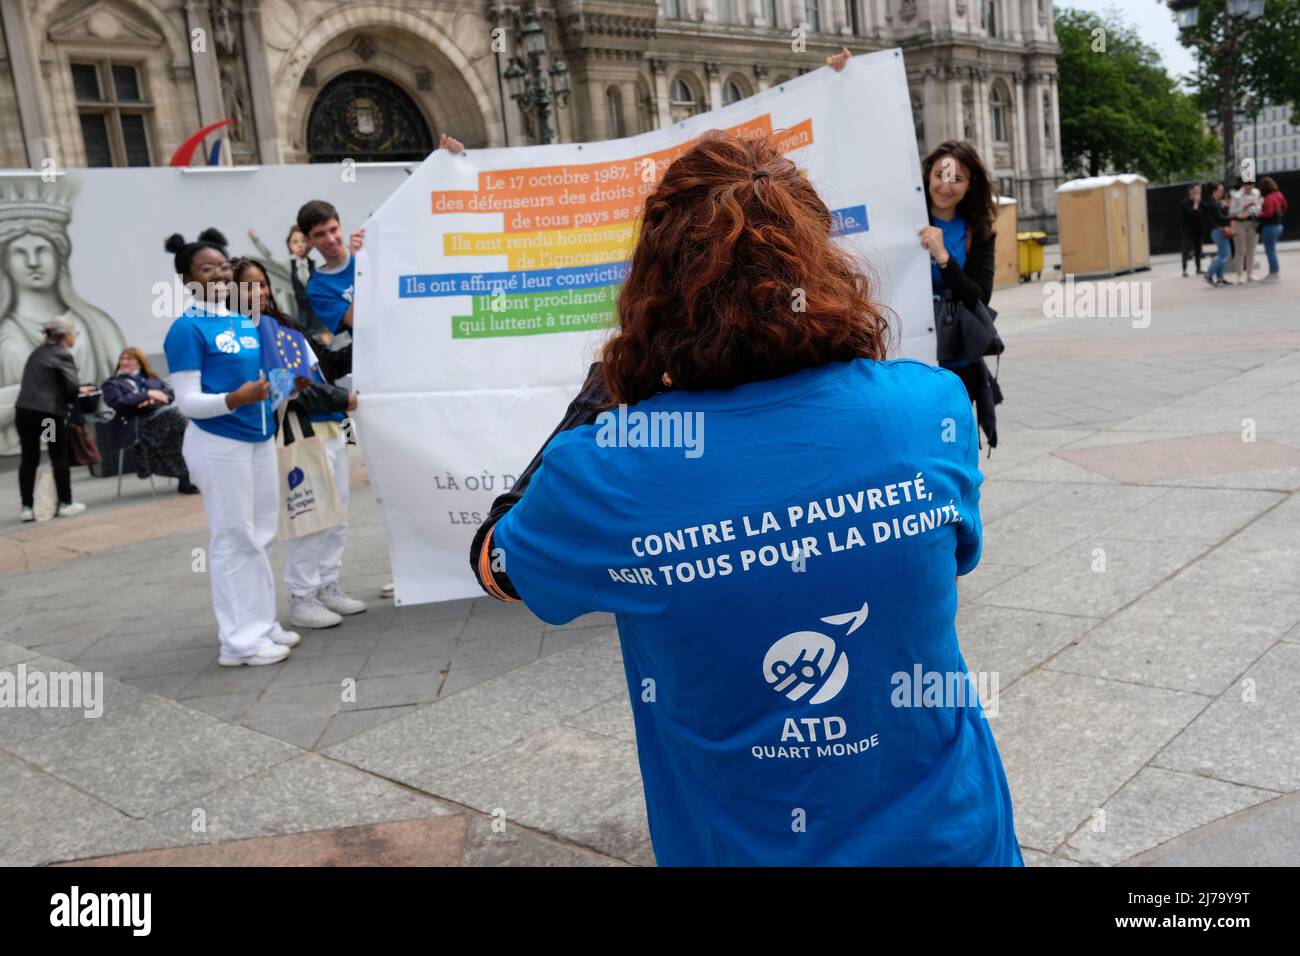 On Saturday 7 May, a Europe Day was organised on the square in front of the Paris City Hall, with stands for NGOs and a conference room Stock Photo